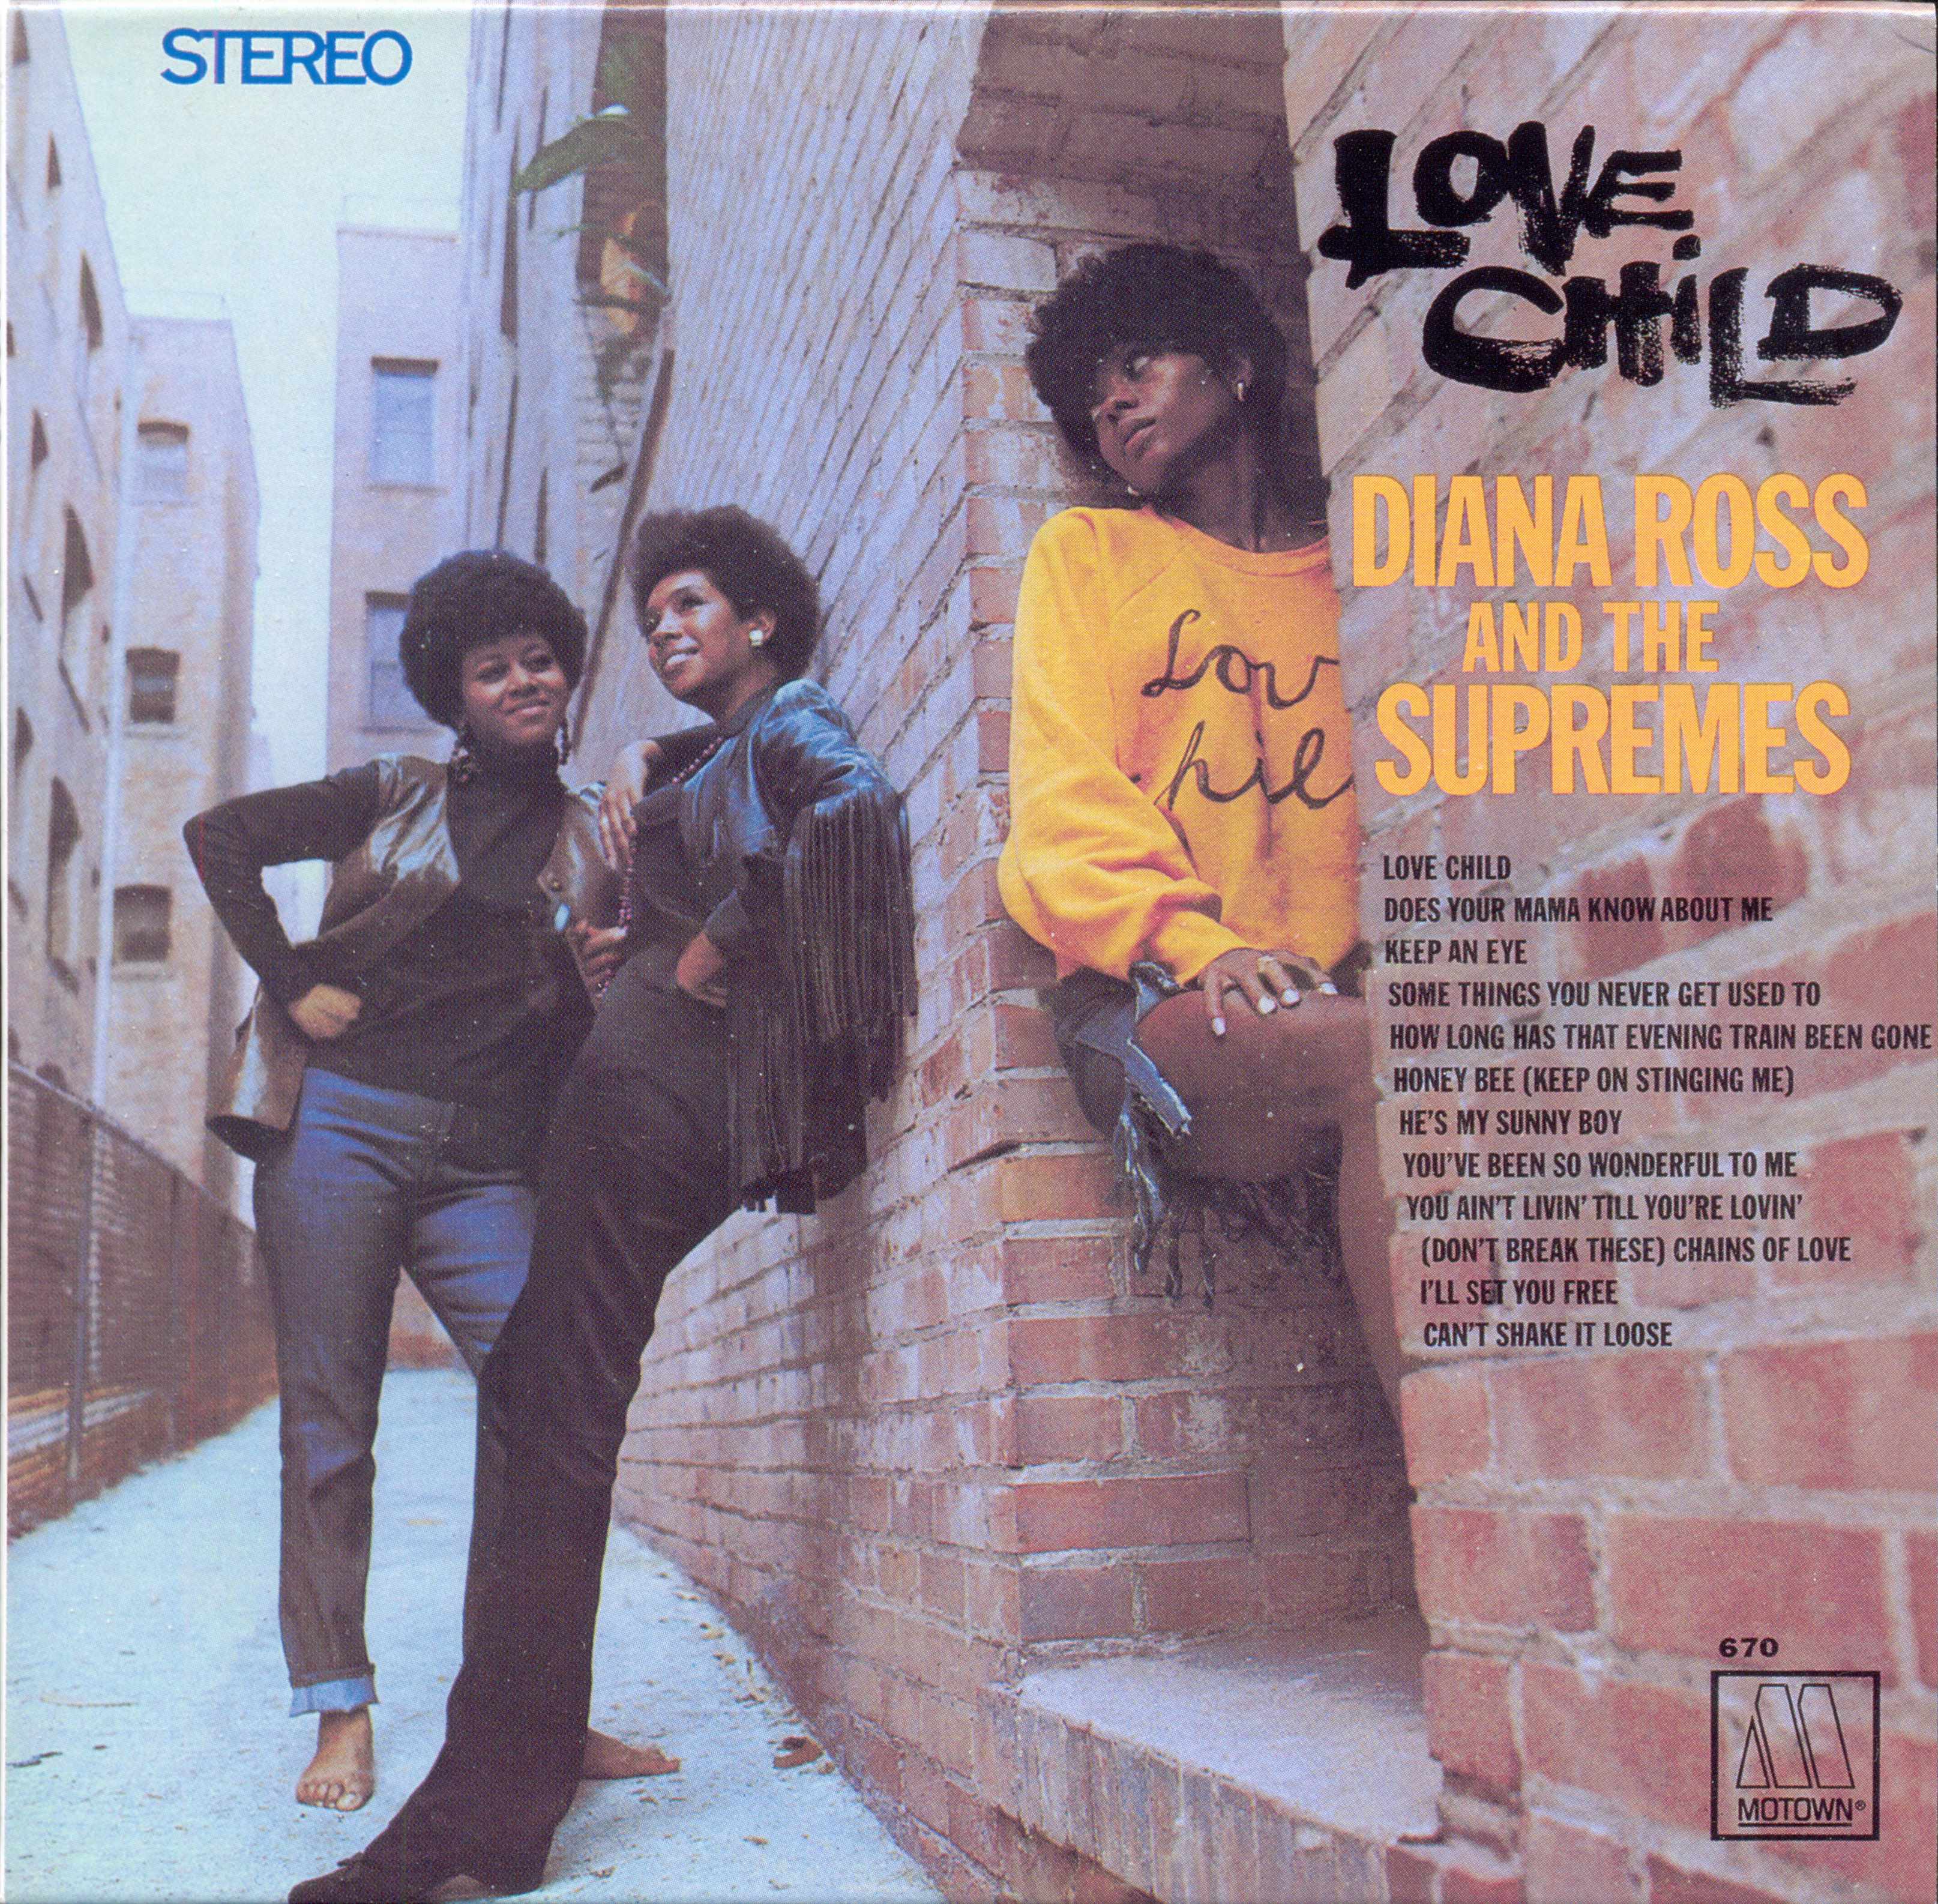 1968 - Diana Ross & The Supremes - Love Child